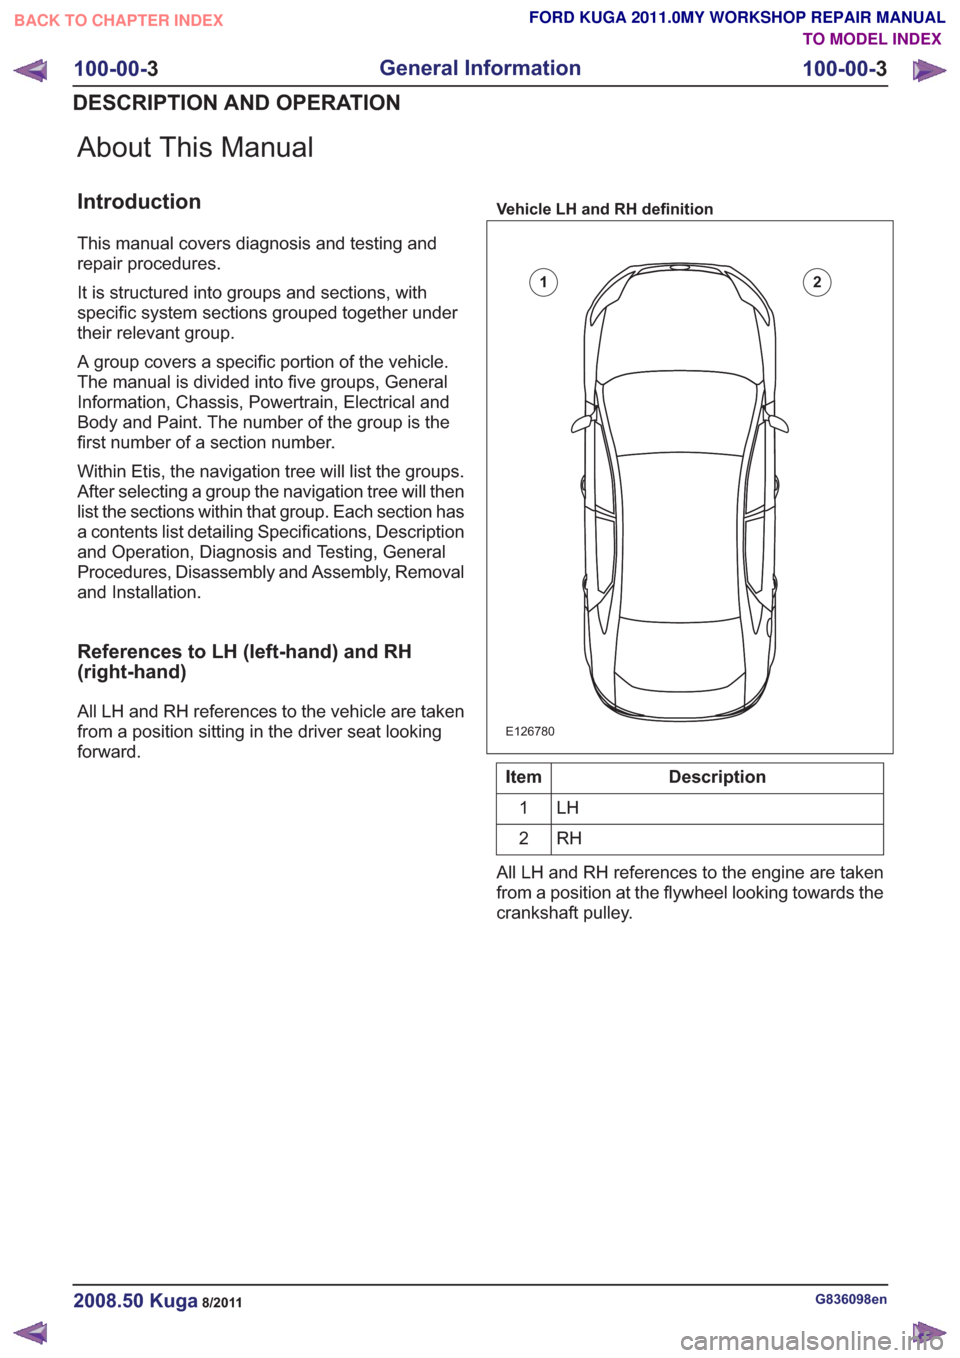 FORD KUGA 2011 1.G Workshop Manual About This Manual
Introduction
This manual covers diagnosis and testing and
repair procedures.
It is structured into groups and sections, with
specific system sections grouped together under
their rel